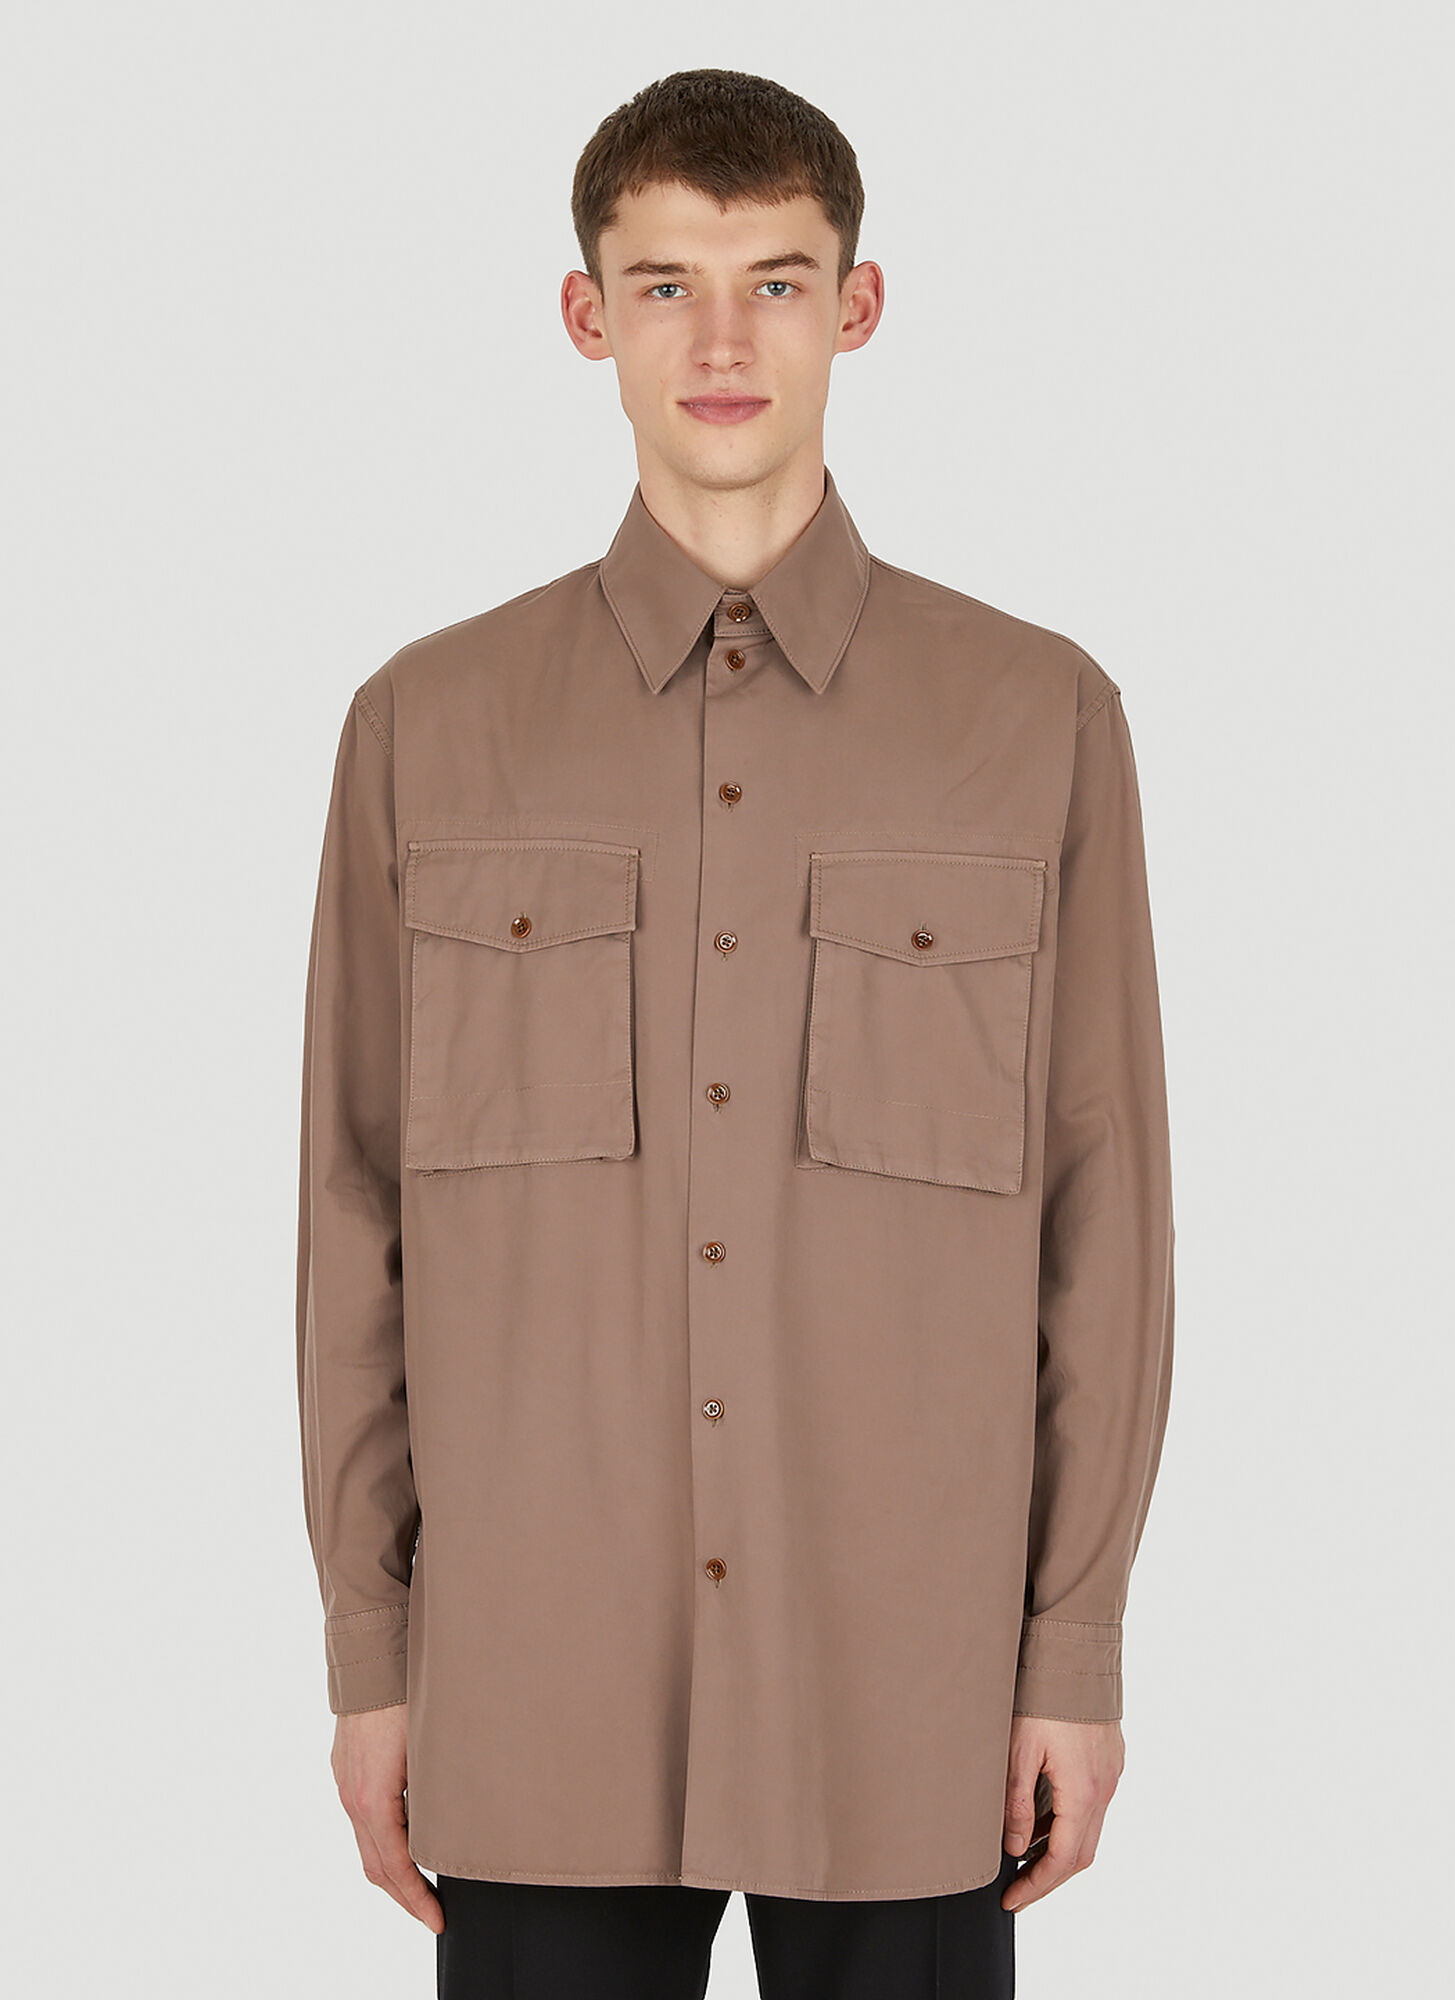 LEMAIRE LEMAIRE MILITARY SHIRT MALE BROWNMALE